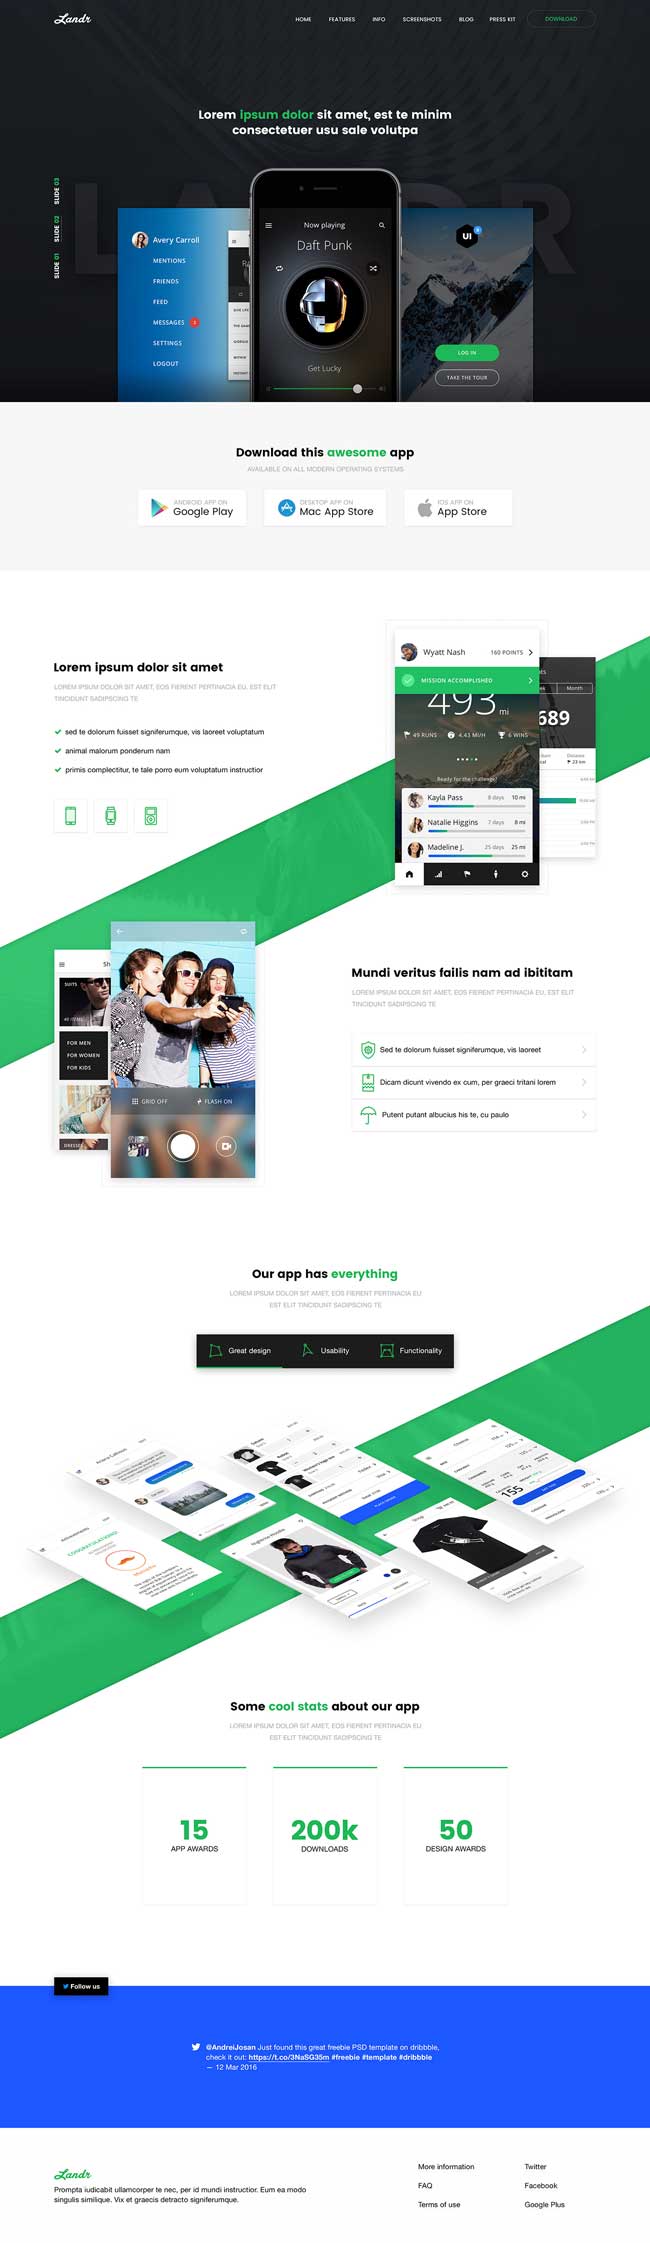 Landr-Free-App-Landing-Page-PSD-Template-Preview